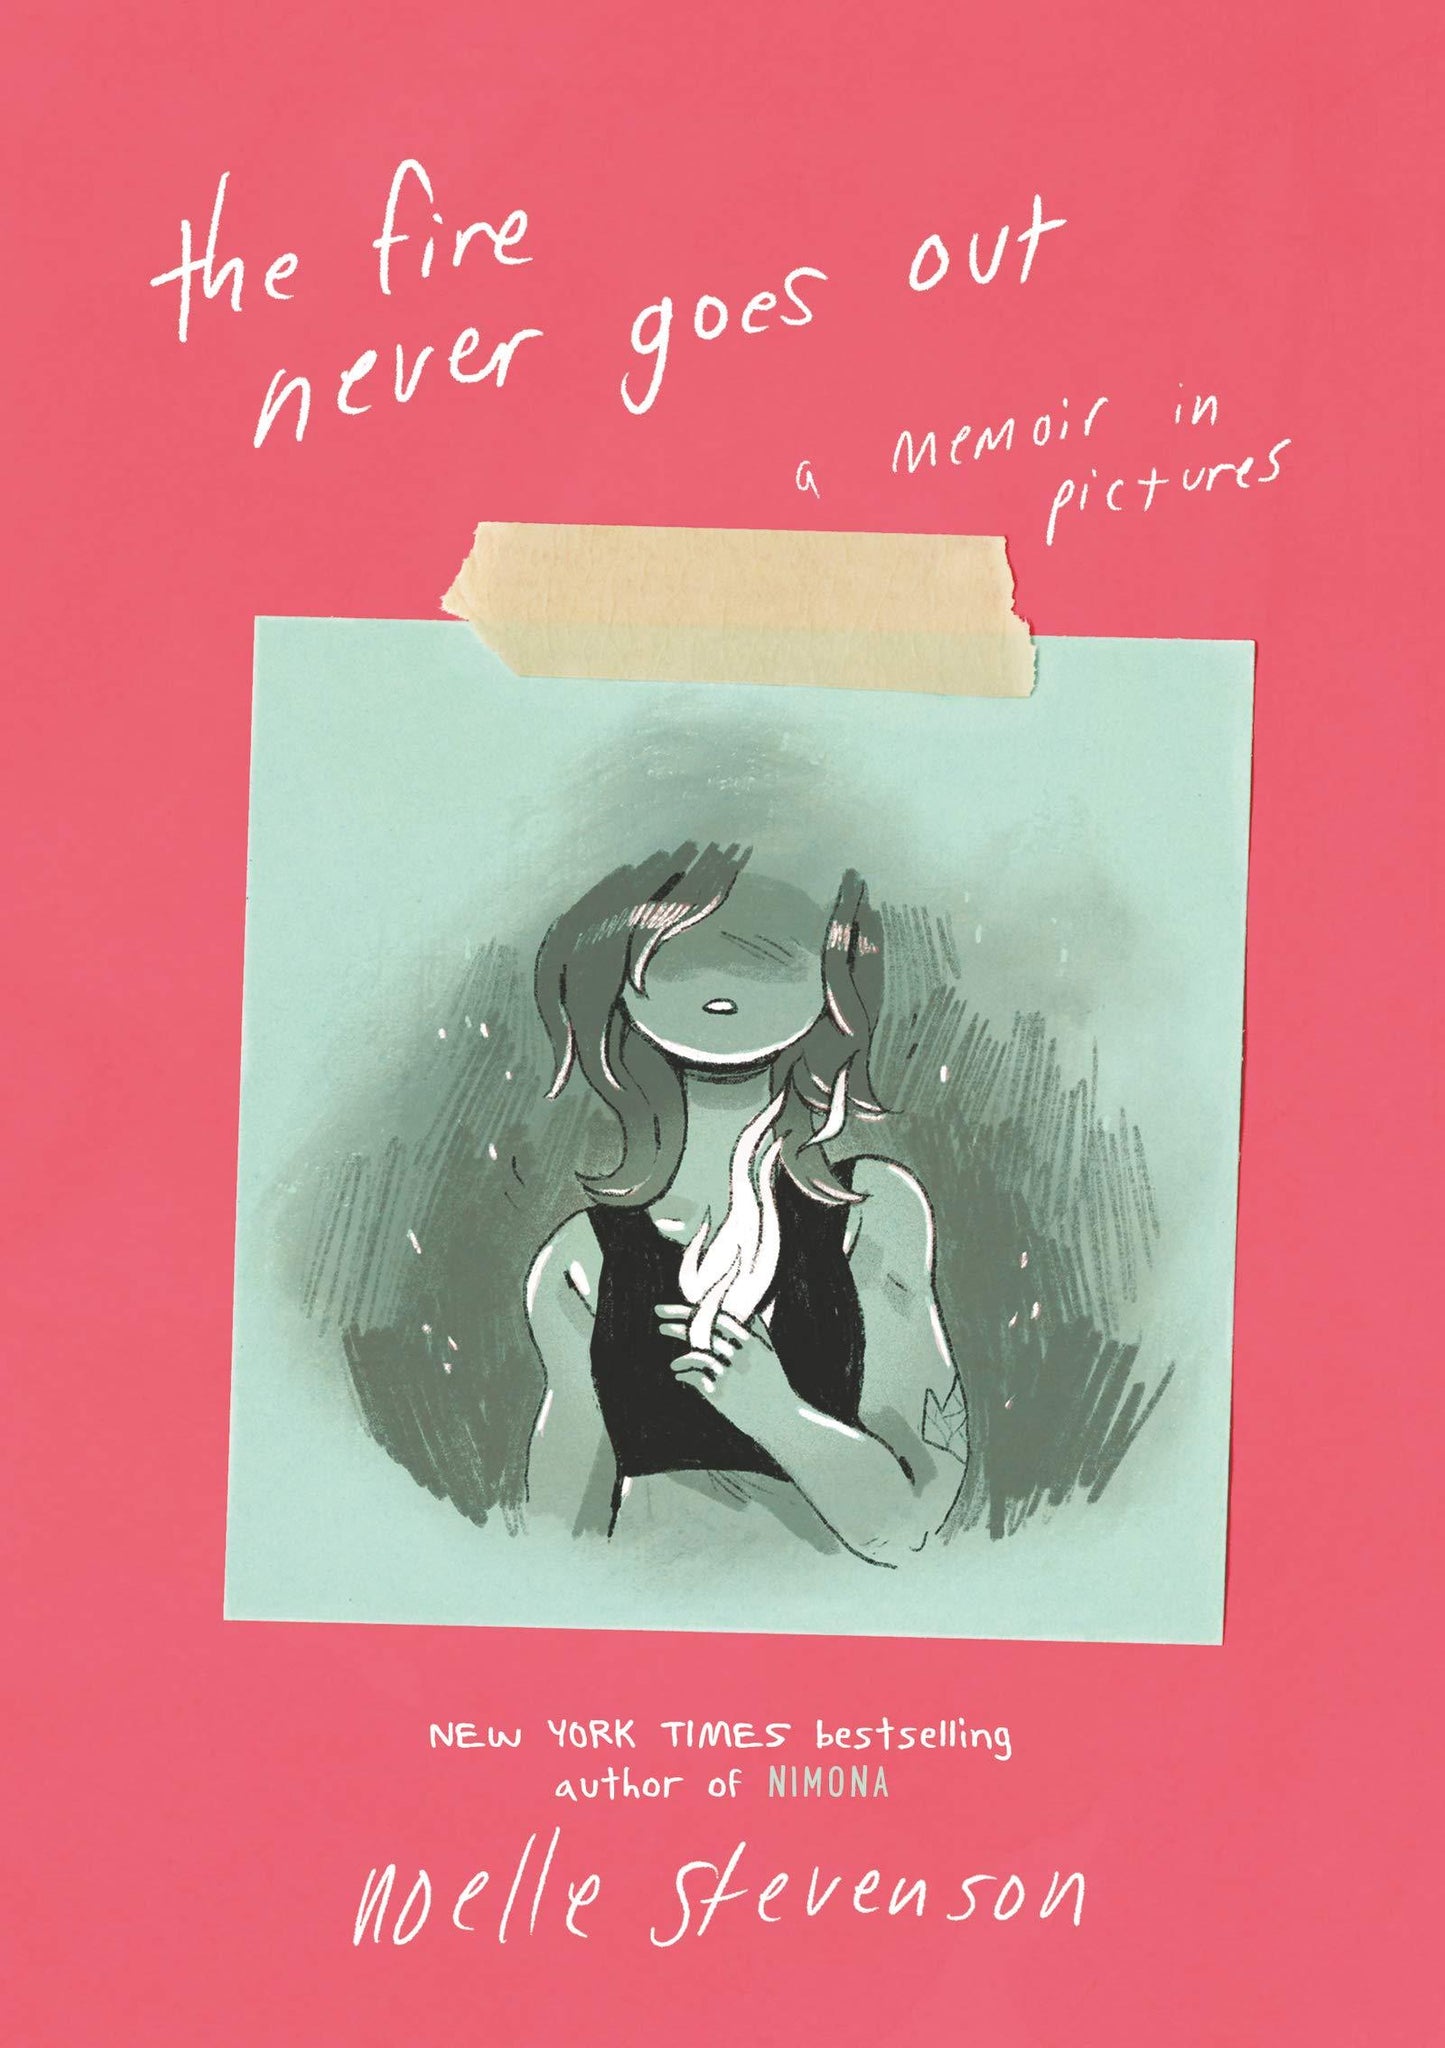 The Fire Never Goes Out: A Memoir in Pictures - ShopQueer.co